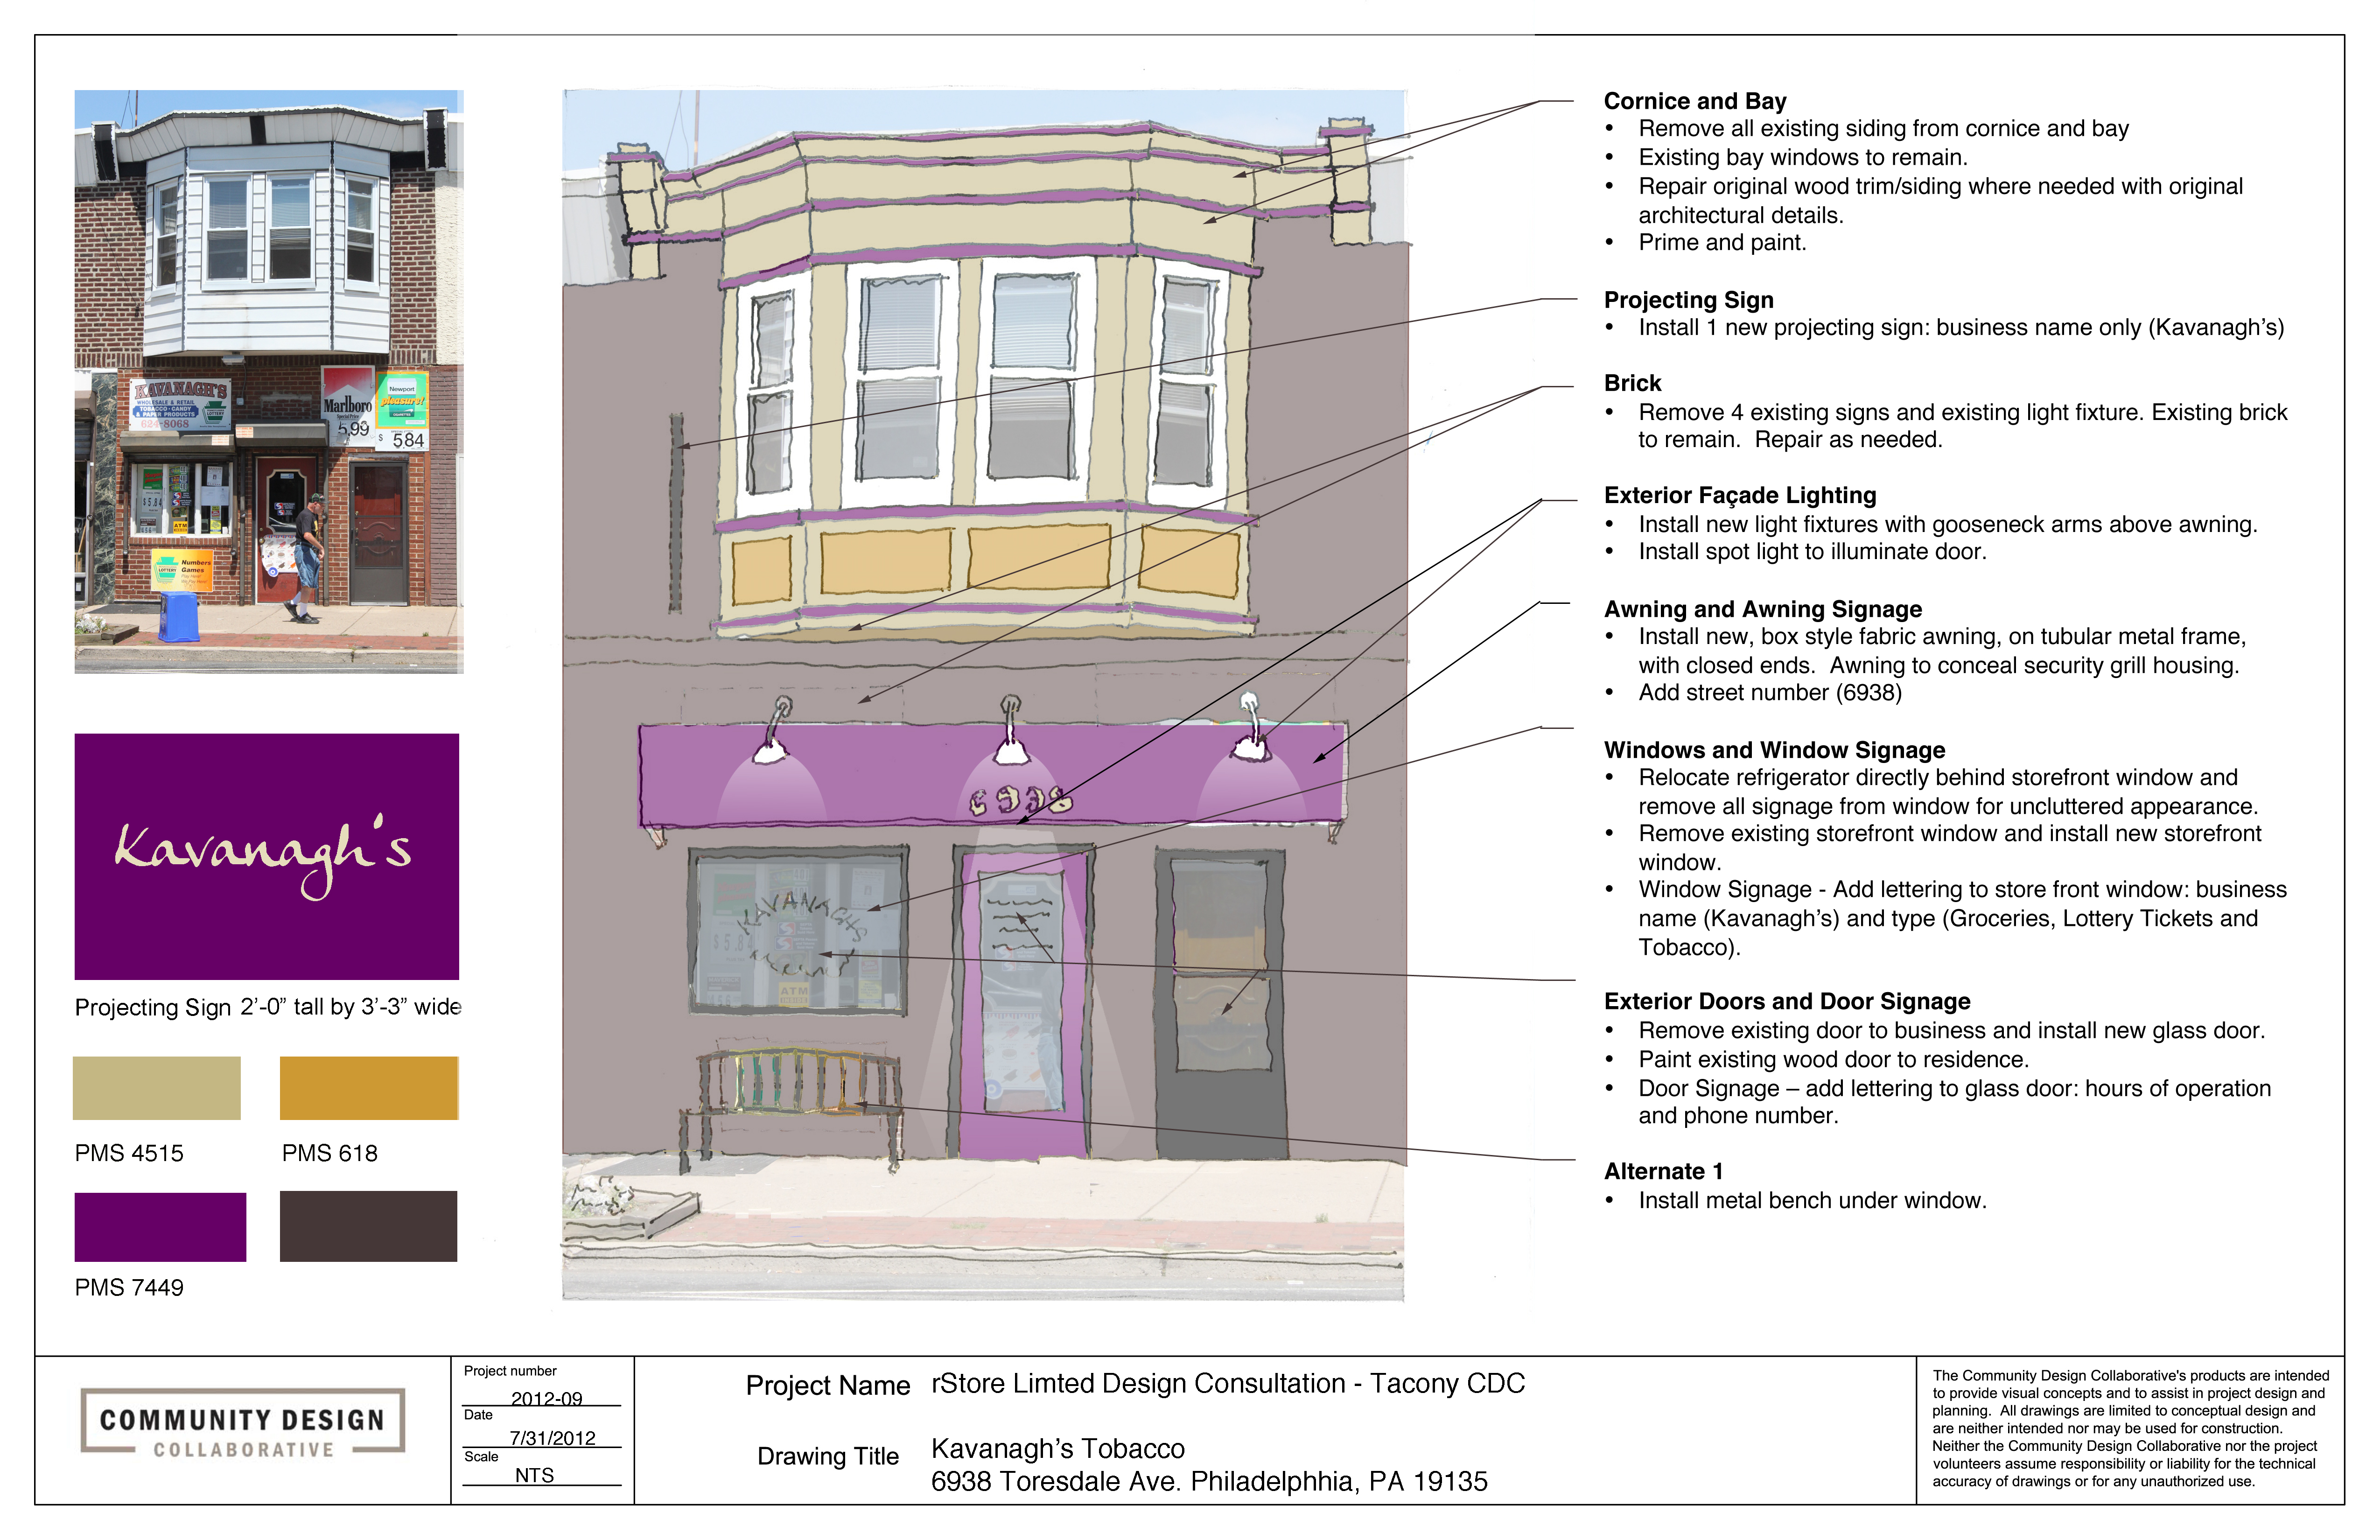 A new look for Kavanagh's Tobacco (6938 Torresdale Ave.) | Community Design Collaborative